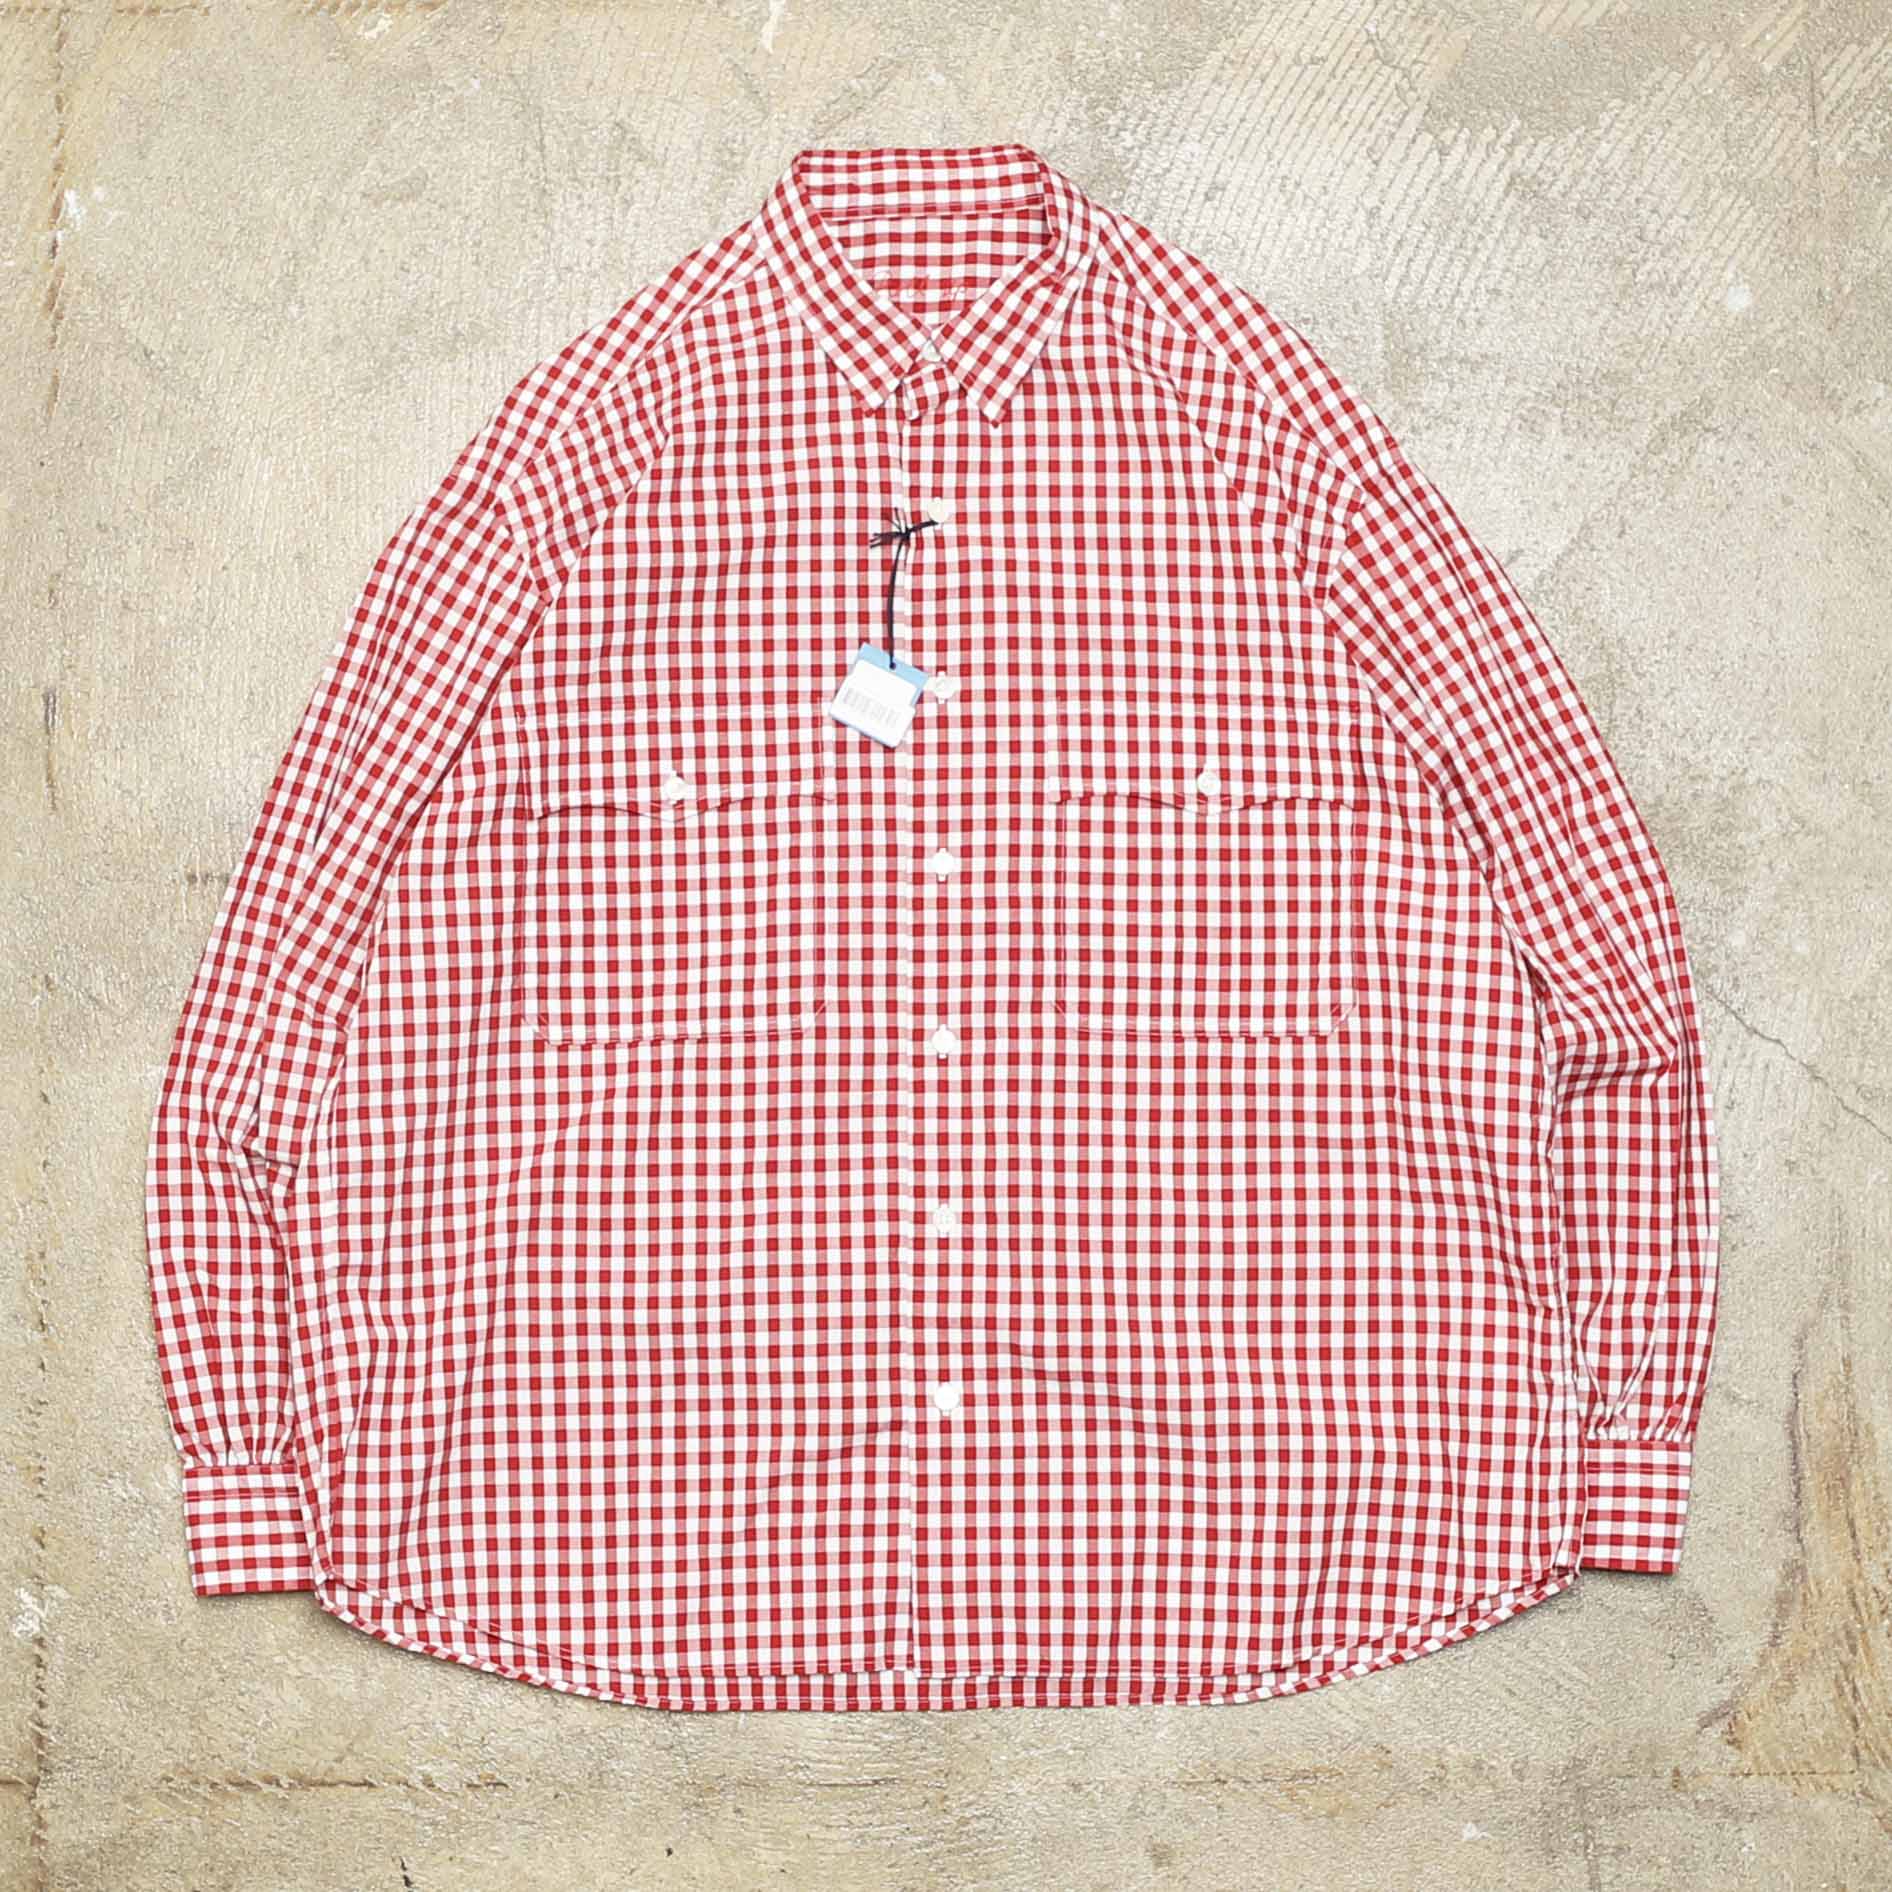 PORTER CLASSIC ROLL UP GINGHAM CHECK SHIRT - RED